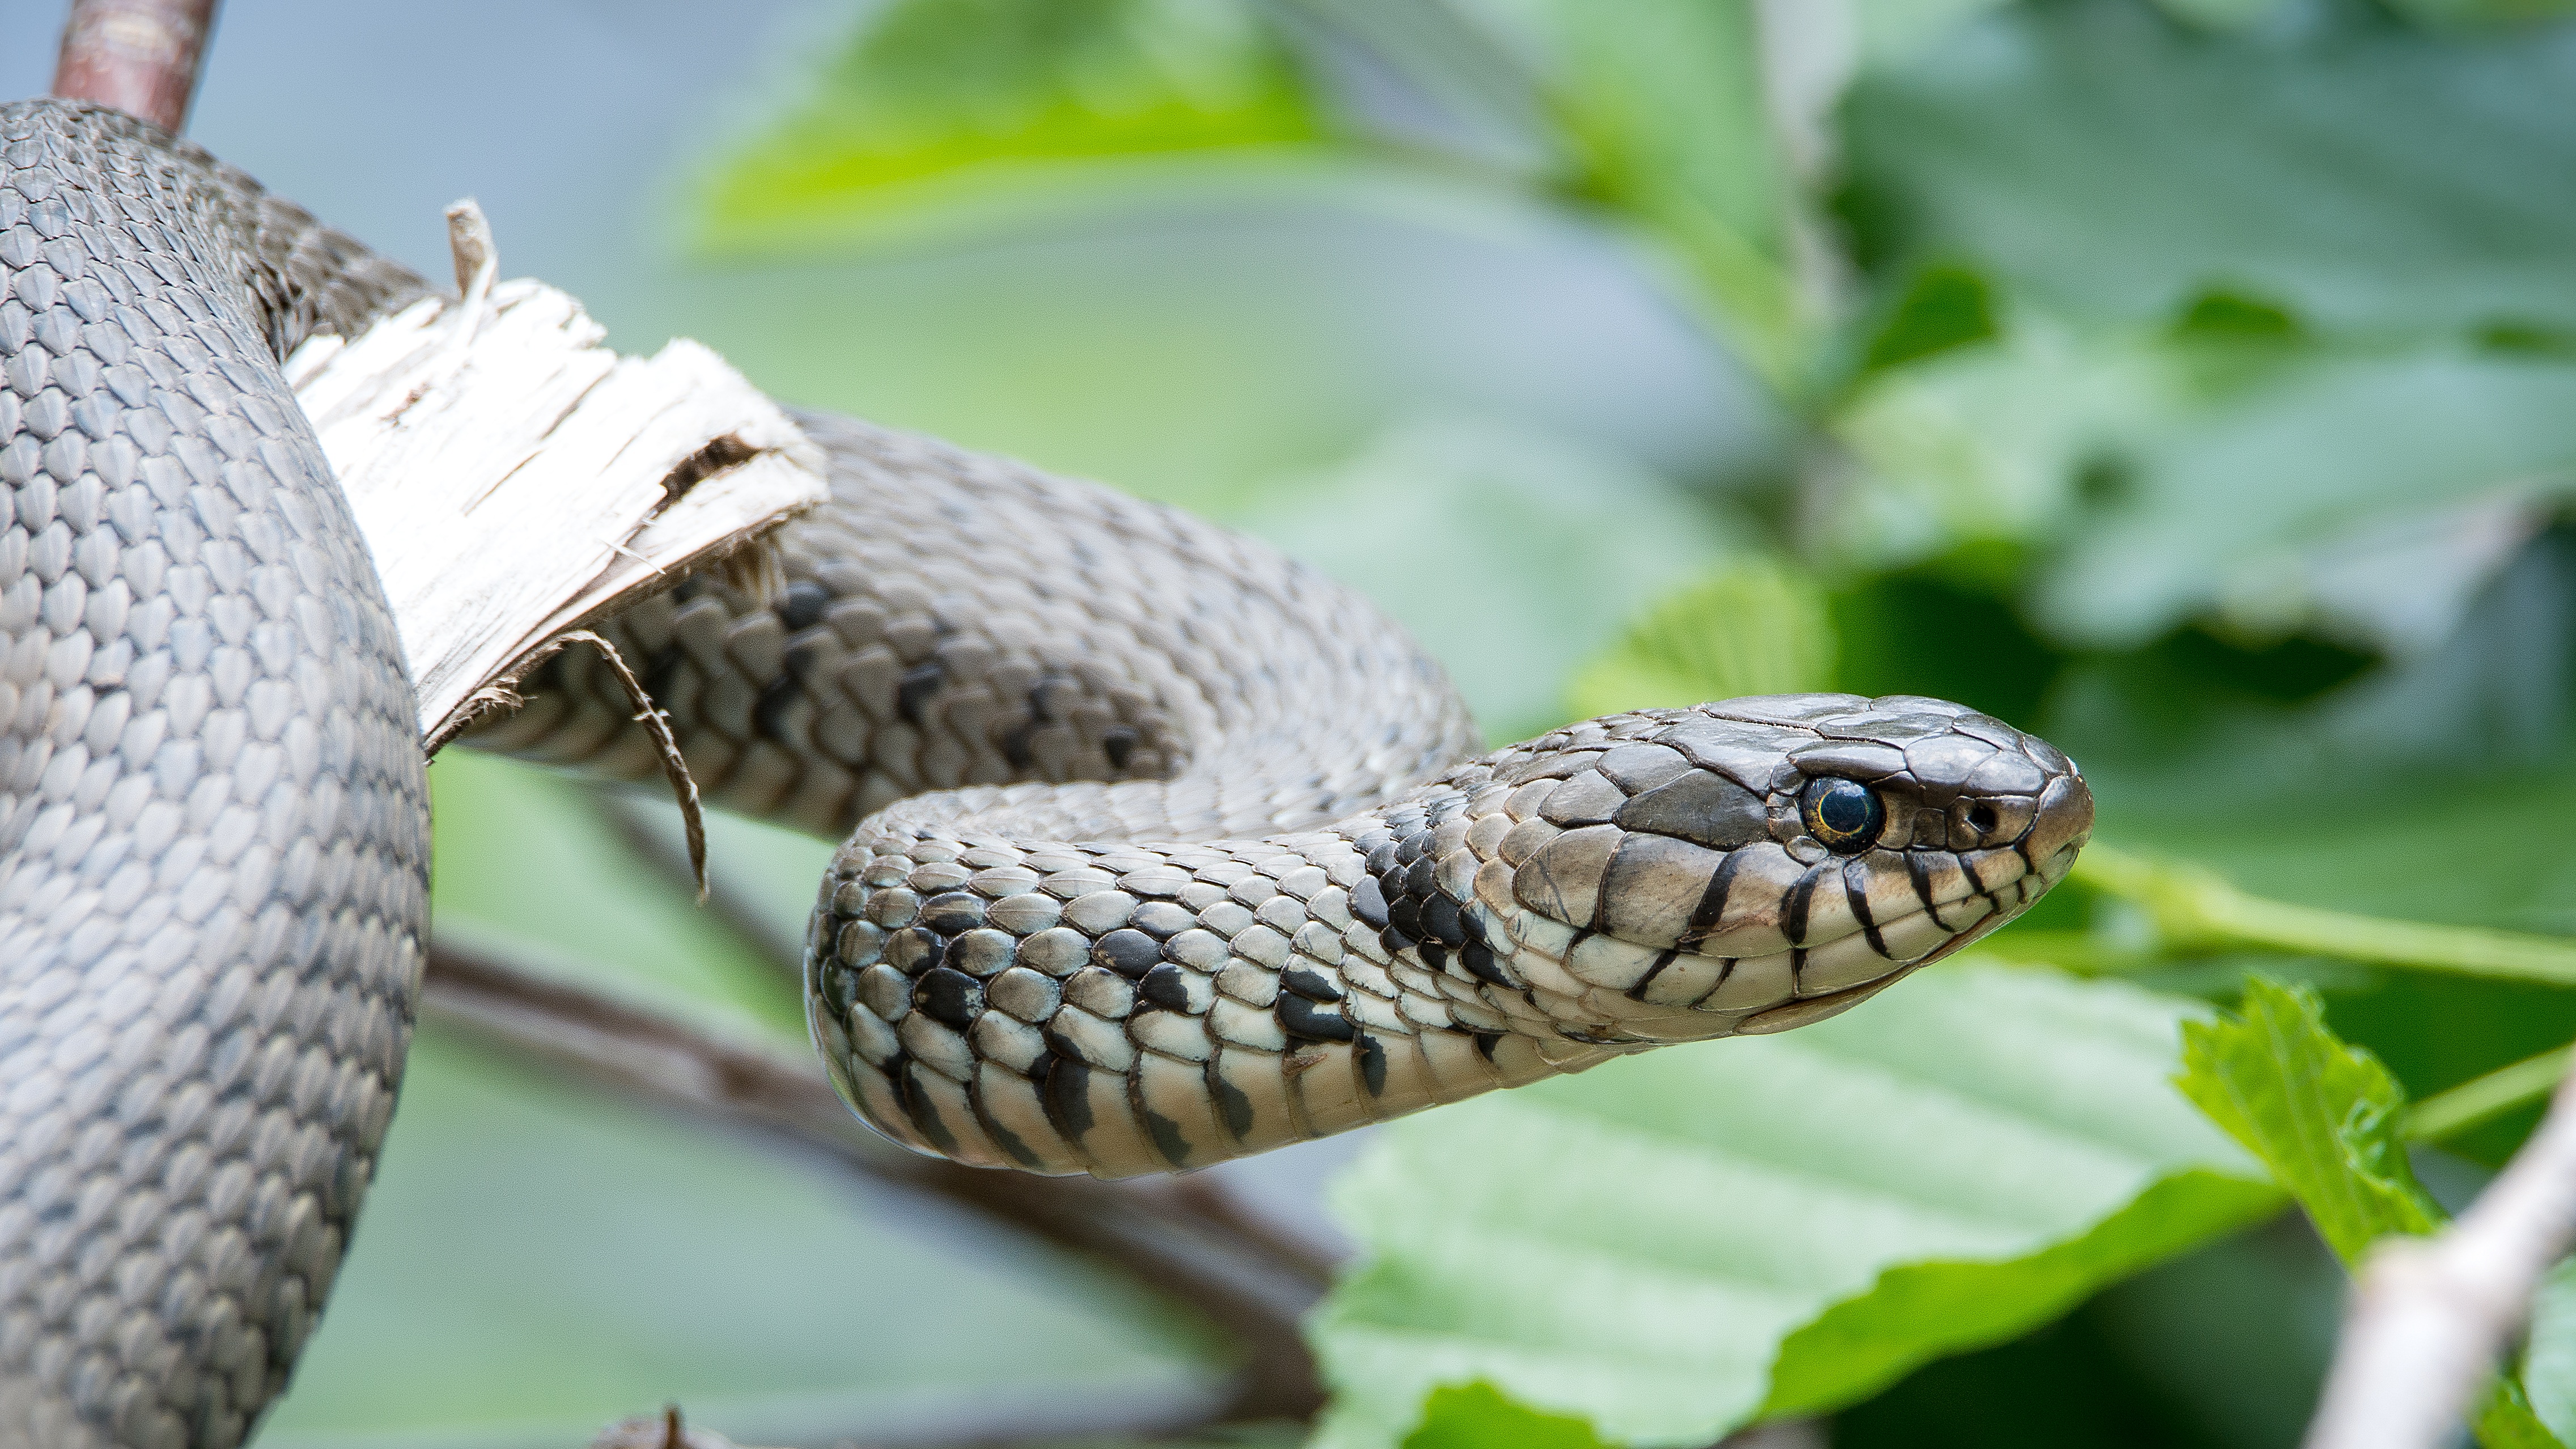 eyes, head, animals, reptile, snake High Definition image